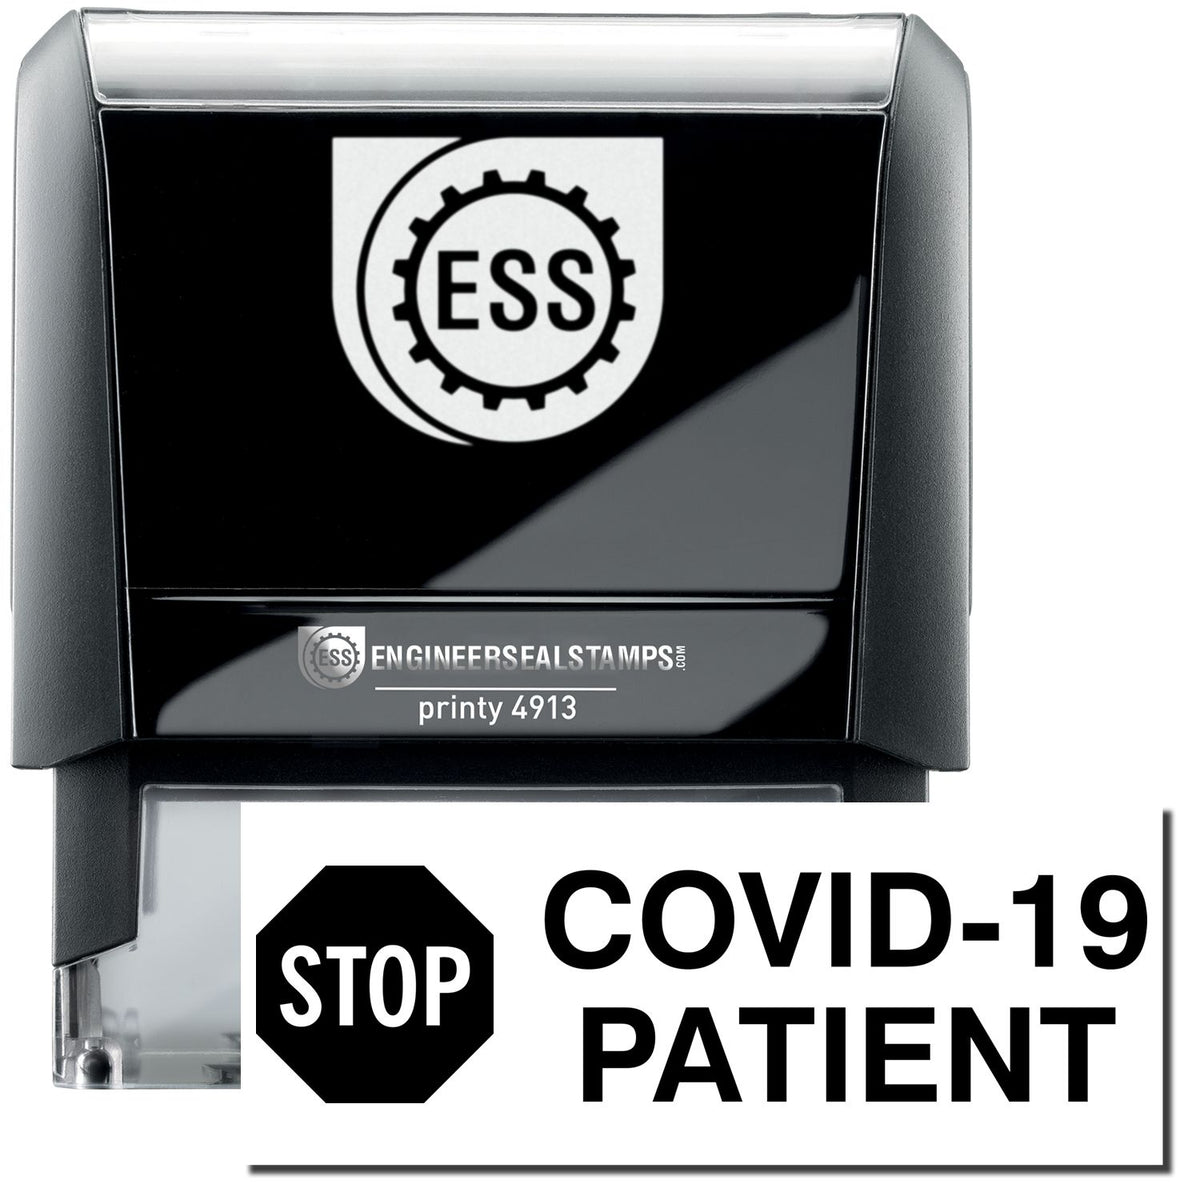 A self-inking stamp with a stamped image showing how the text &quot;STOP COVID-19 PATIENT&quot; in a large font with a stop sign board is displayed by it after stamping.